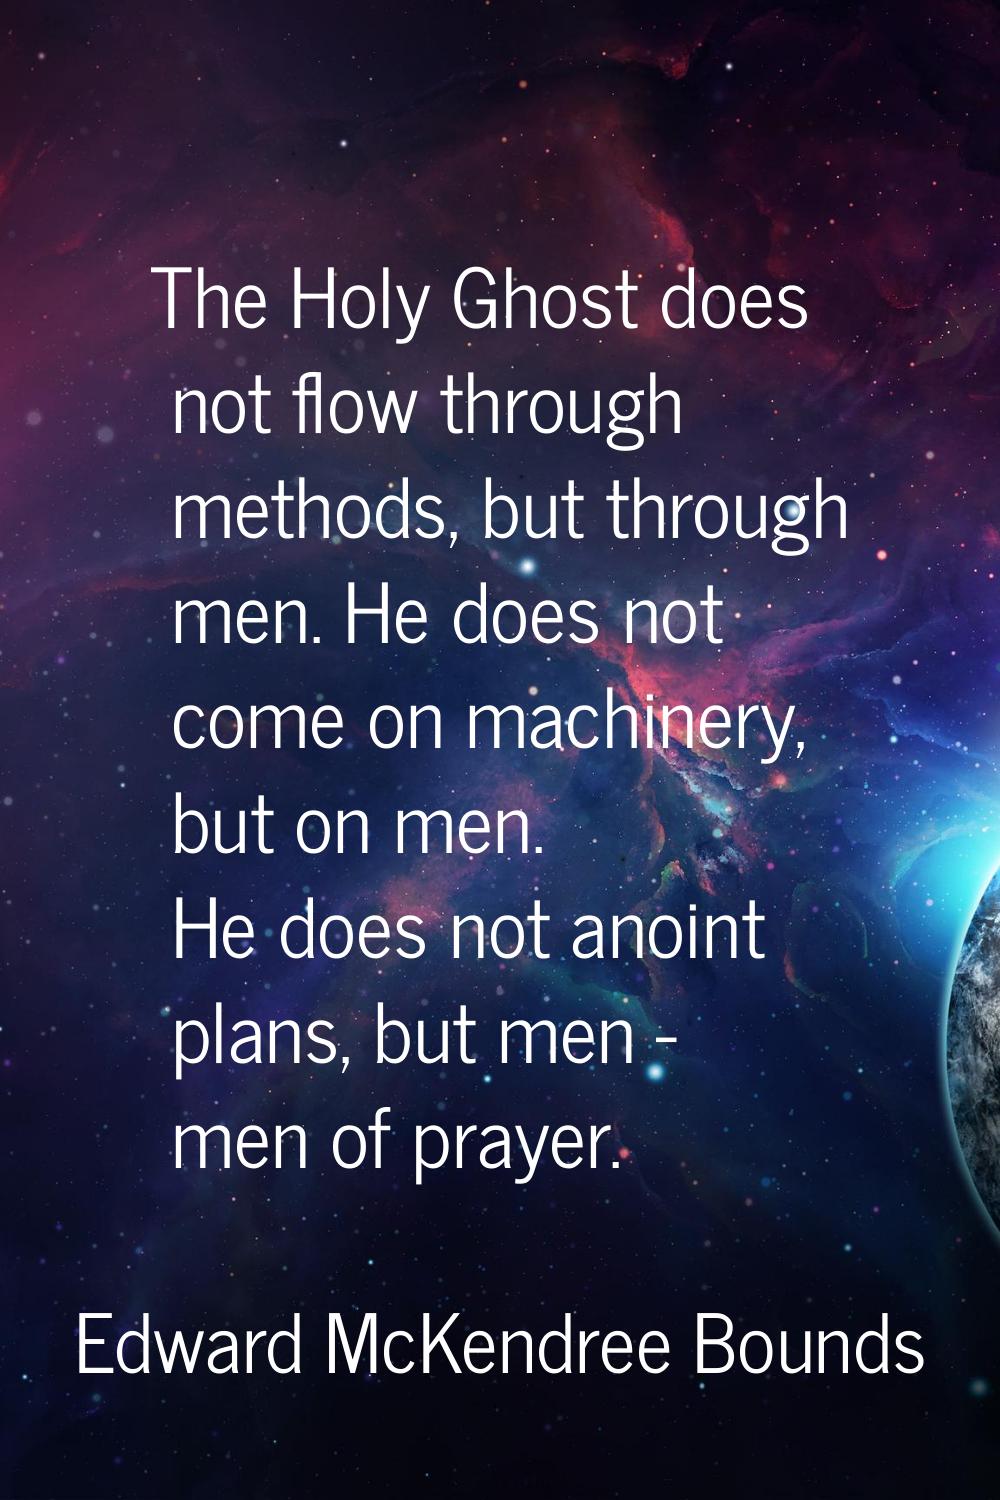 The Holy Ghost does not flow through methods, but through men. He does not come on machinery, but o